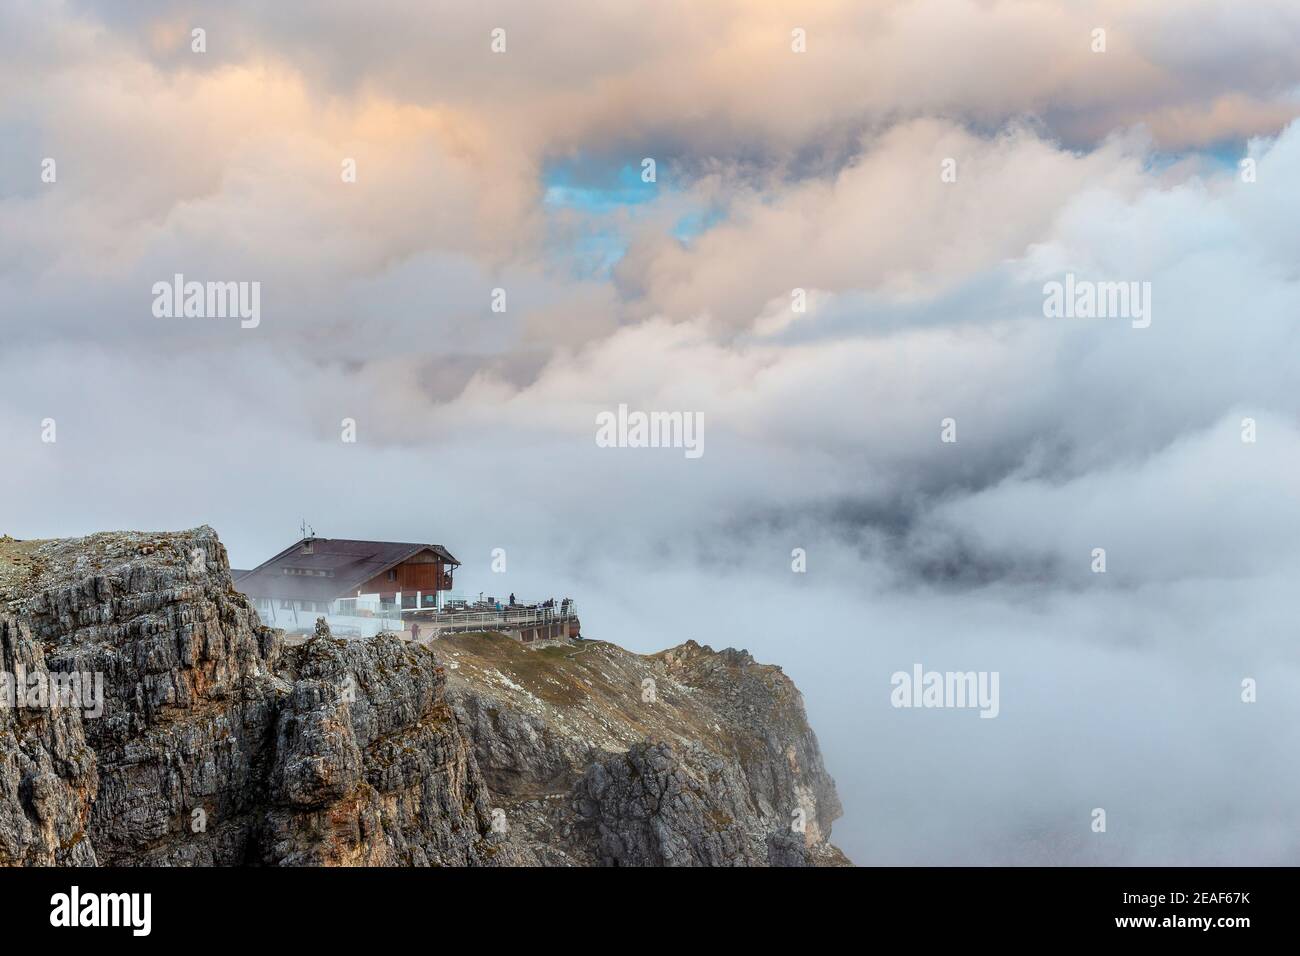 The Lagazuoi alpine refuge in the Lagazuoi mountain group. The Ampezzo Dolomites. Clouds in sky at sunset. Italian Alps. Europe. Stock Photo